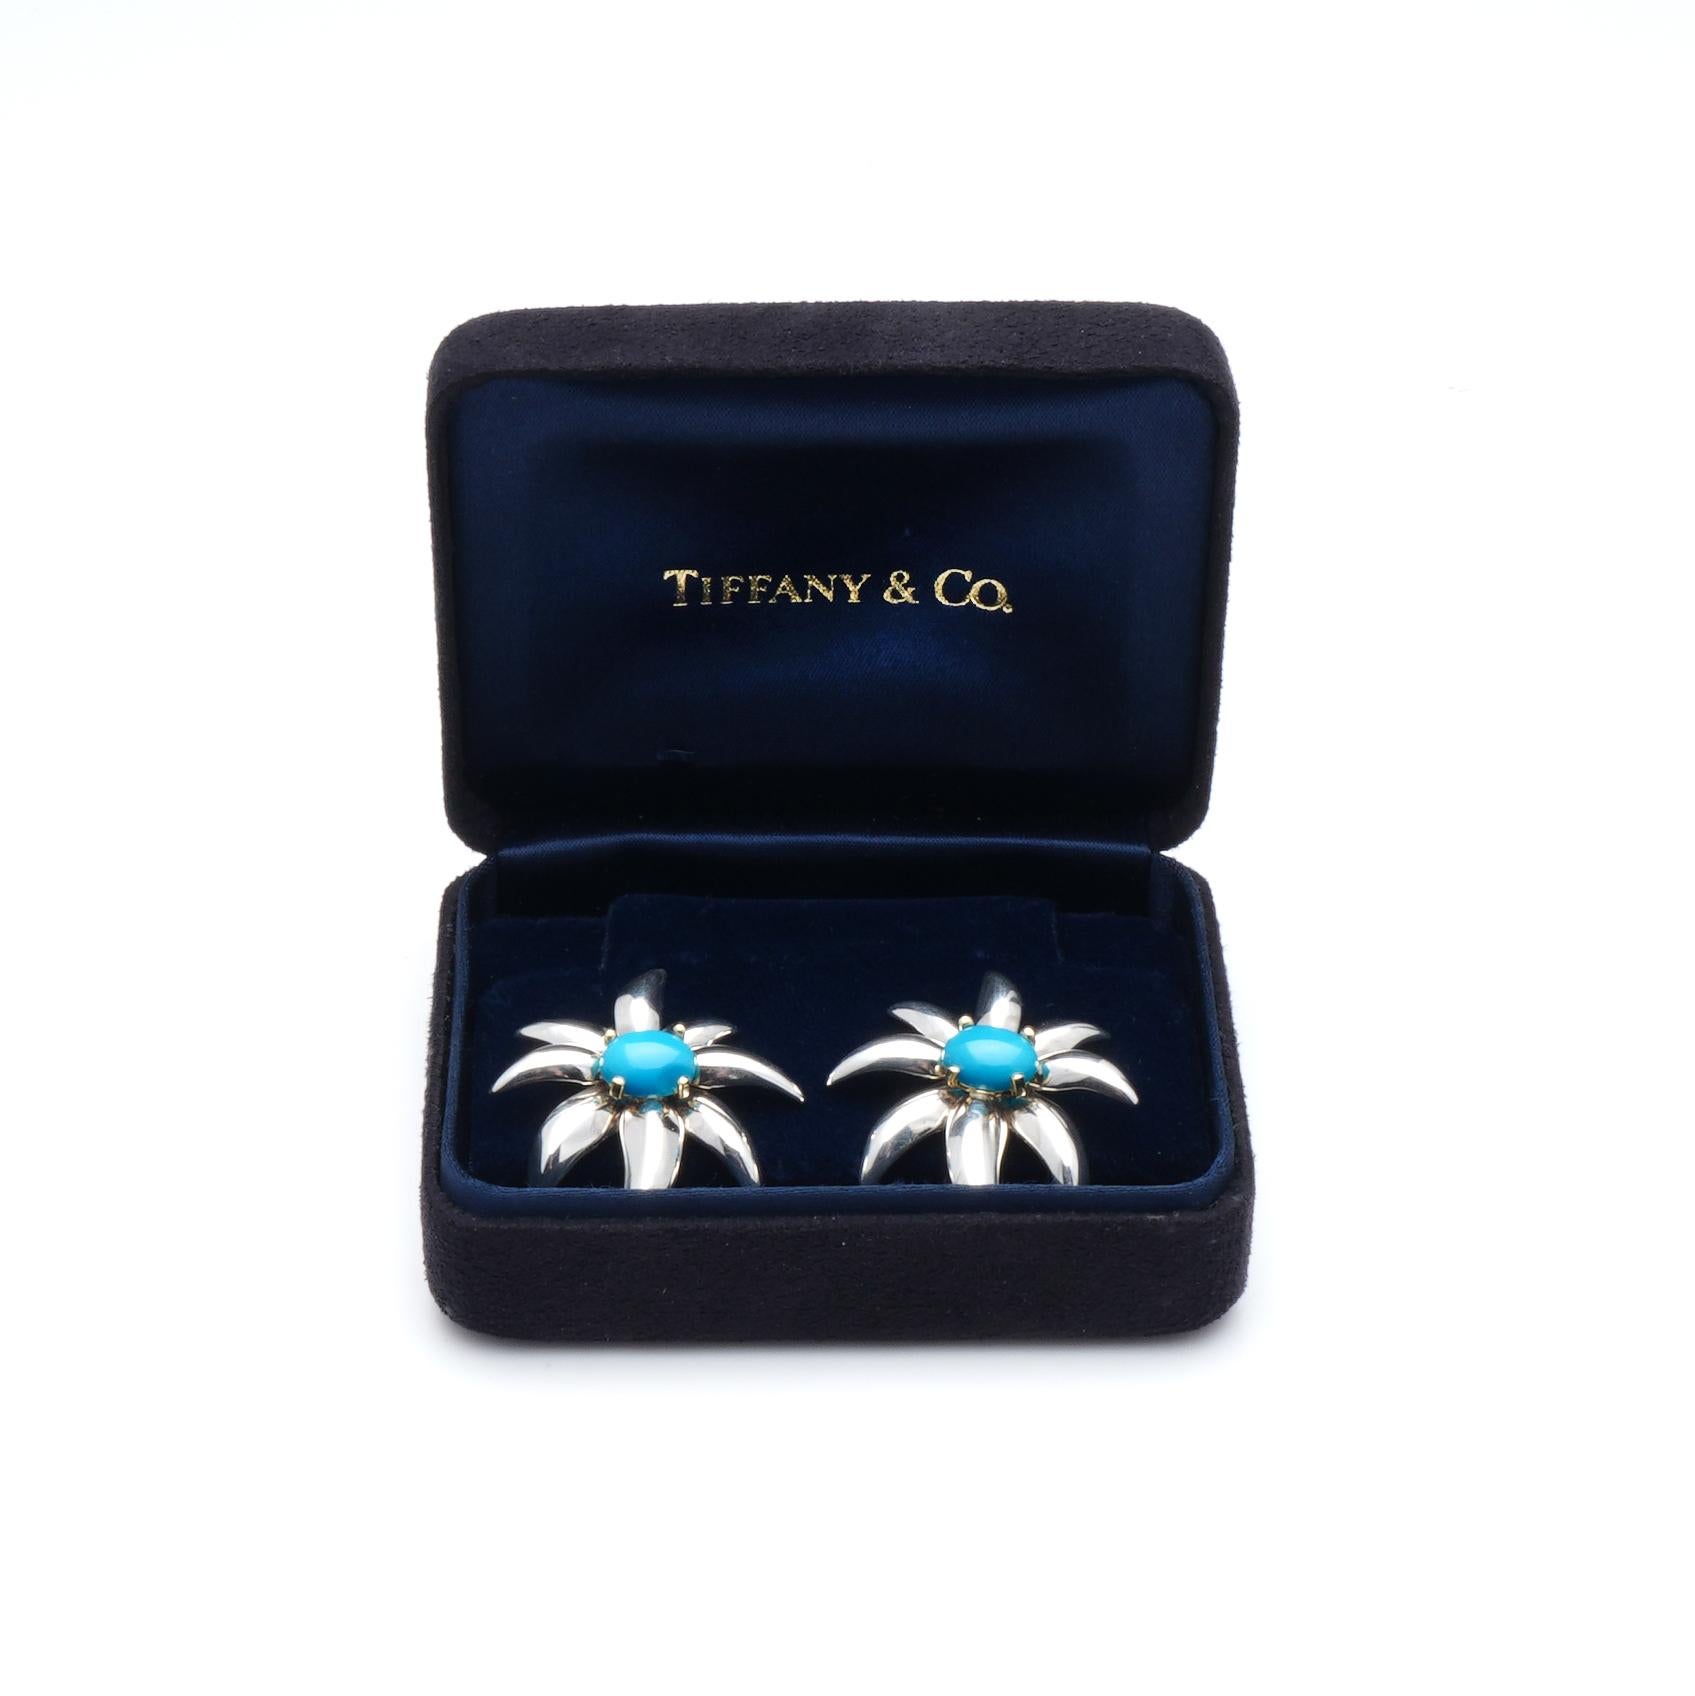 Tiffany & Co. 18kt. yellow gold and 925 silver clip - on fireworks earrings, set with turquoise at the centre.   
Made in USA, 1995
Fully hallmarked.

The Fireworks earrings date to 1995 and are no longer available for sale at Tiffany. 
The